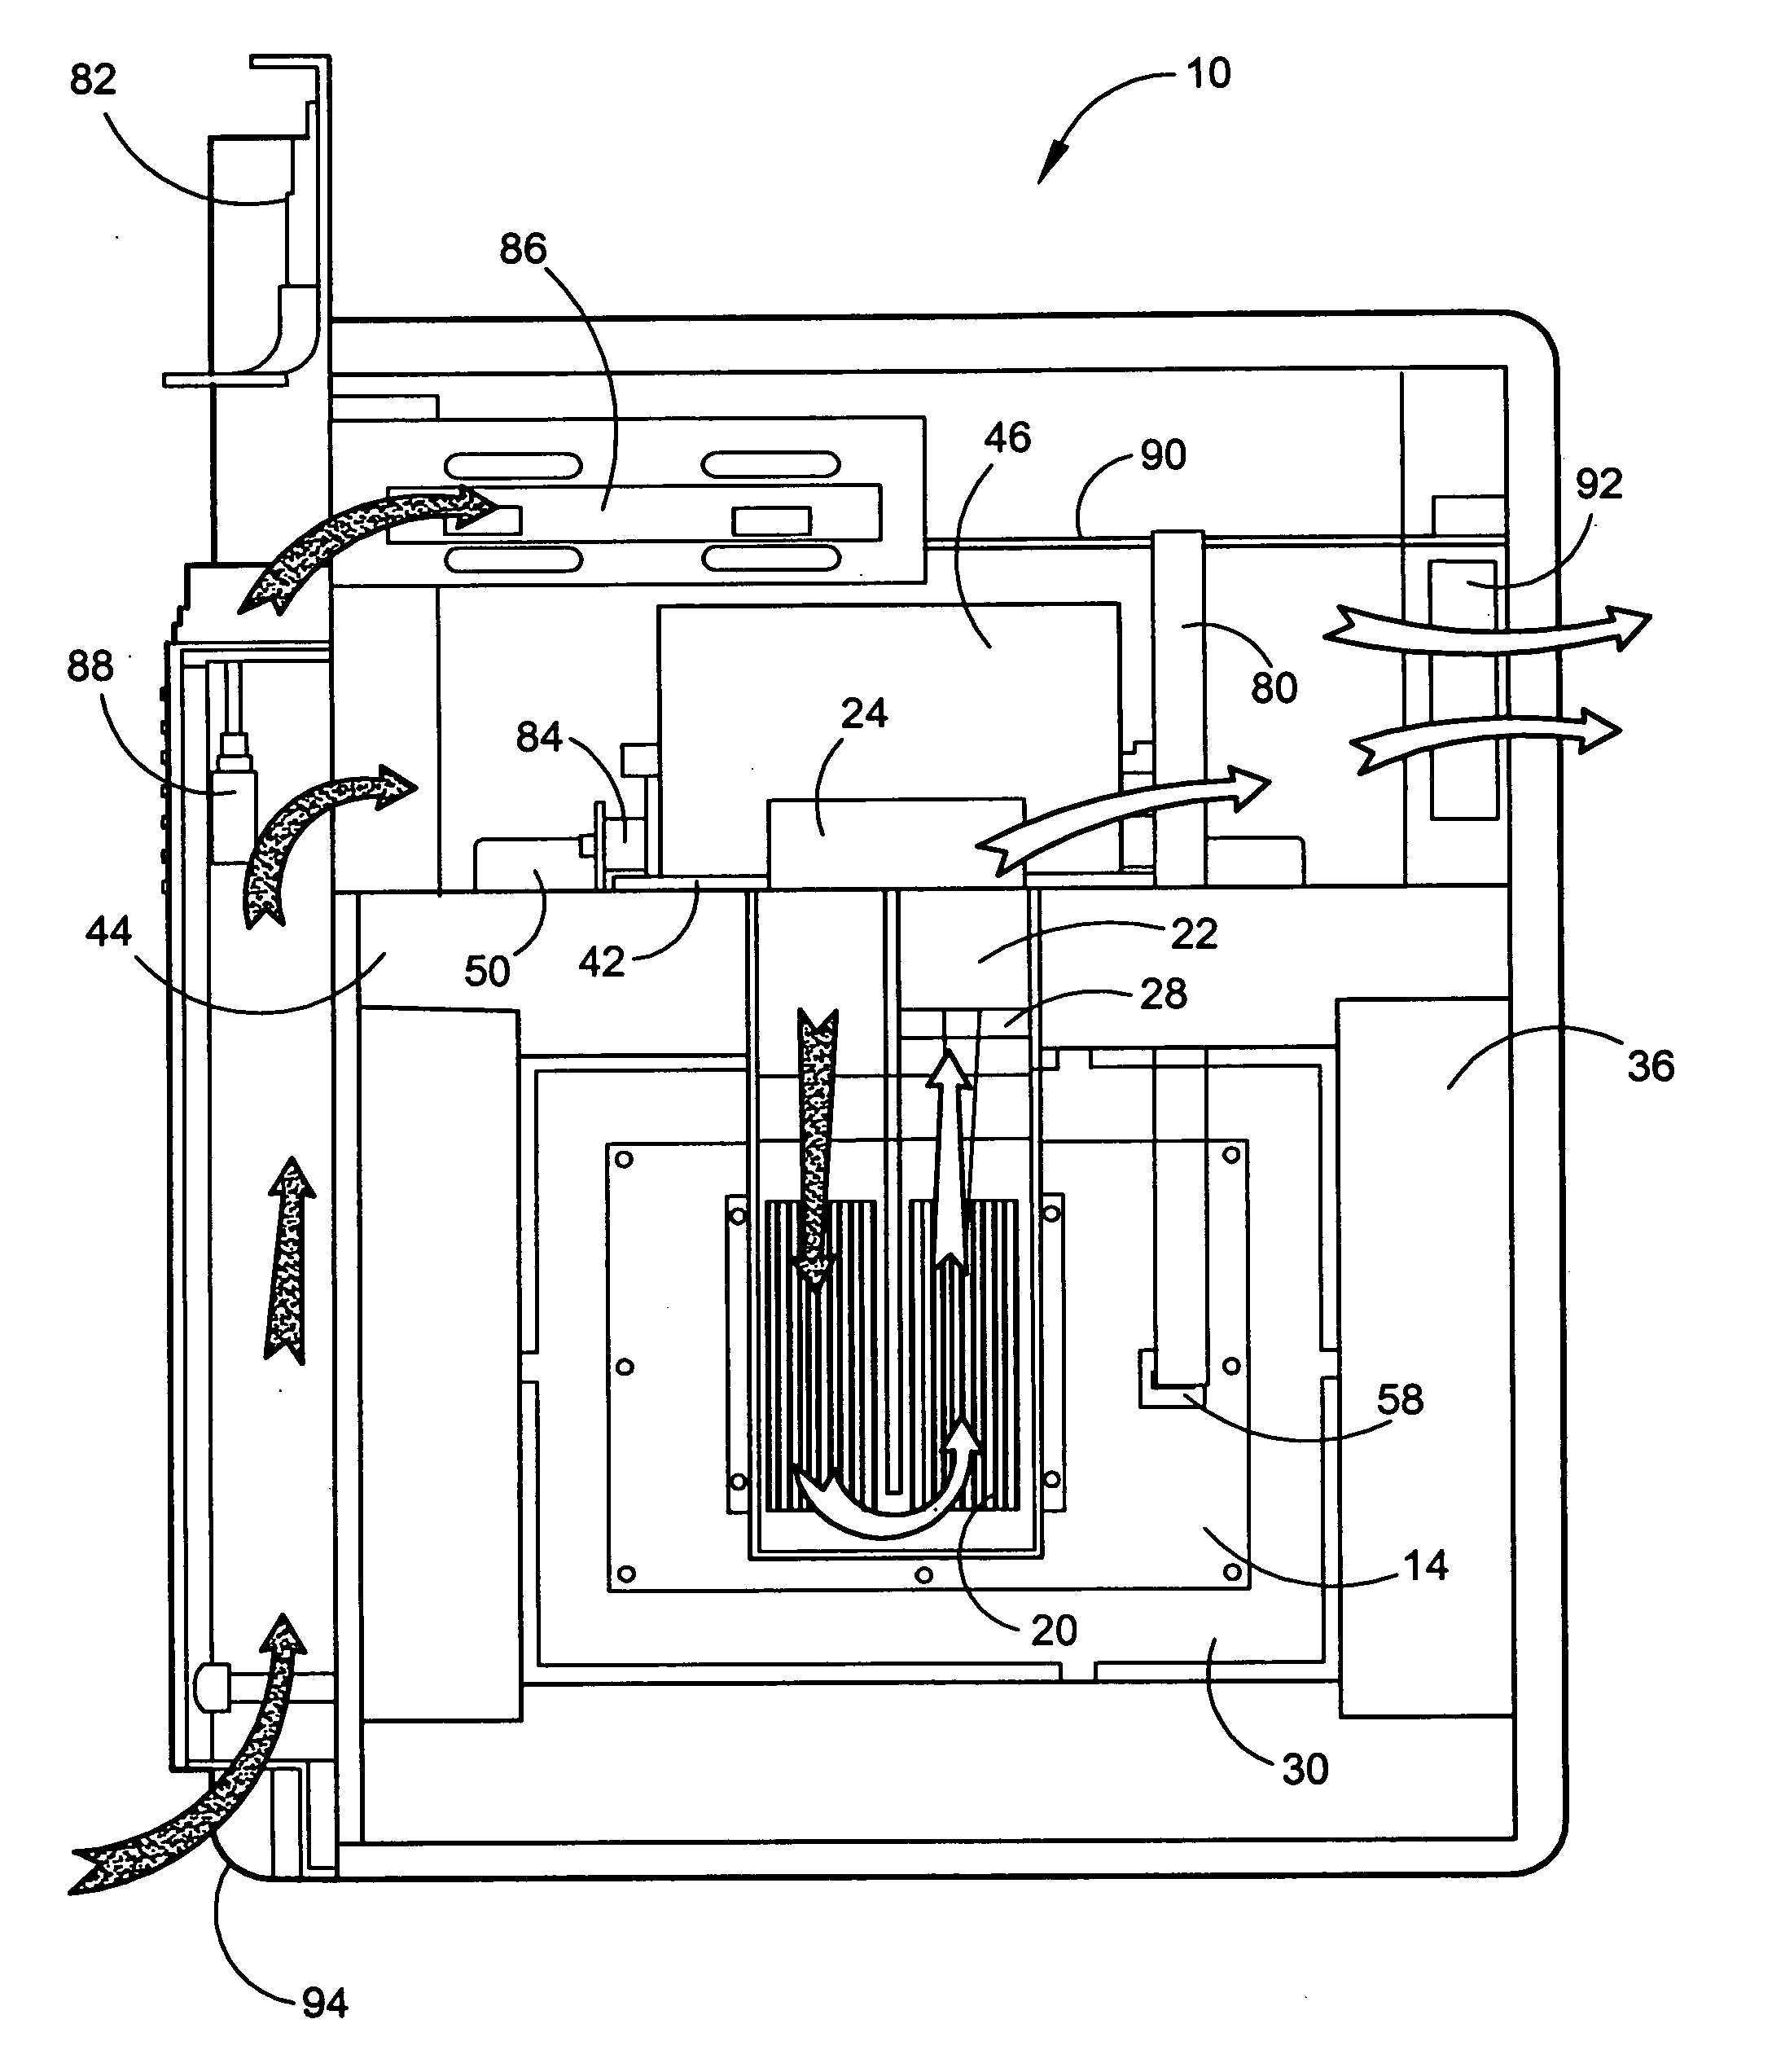 Data storage protection device